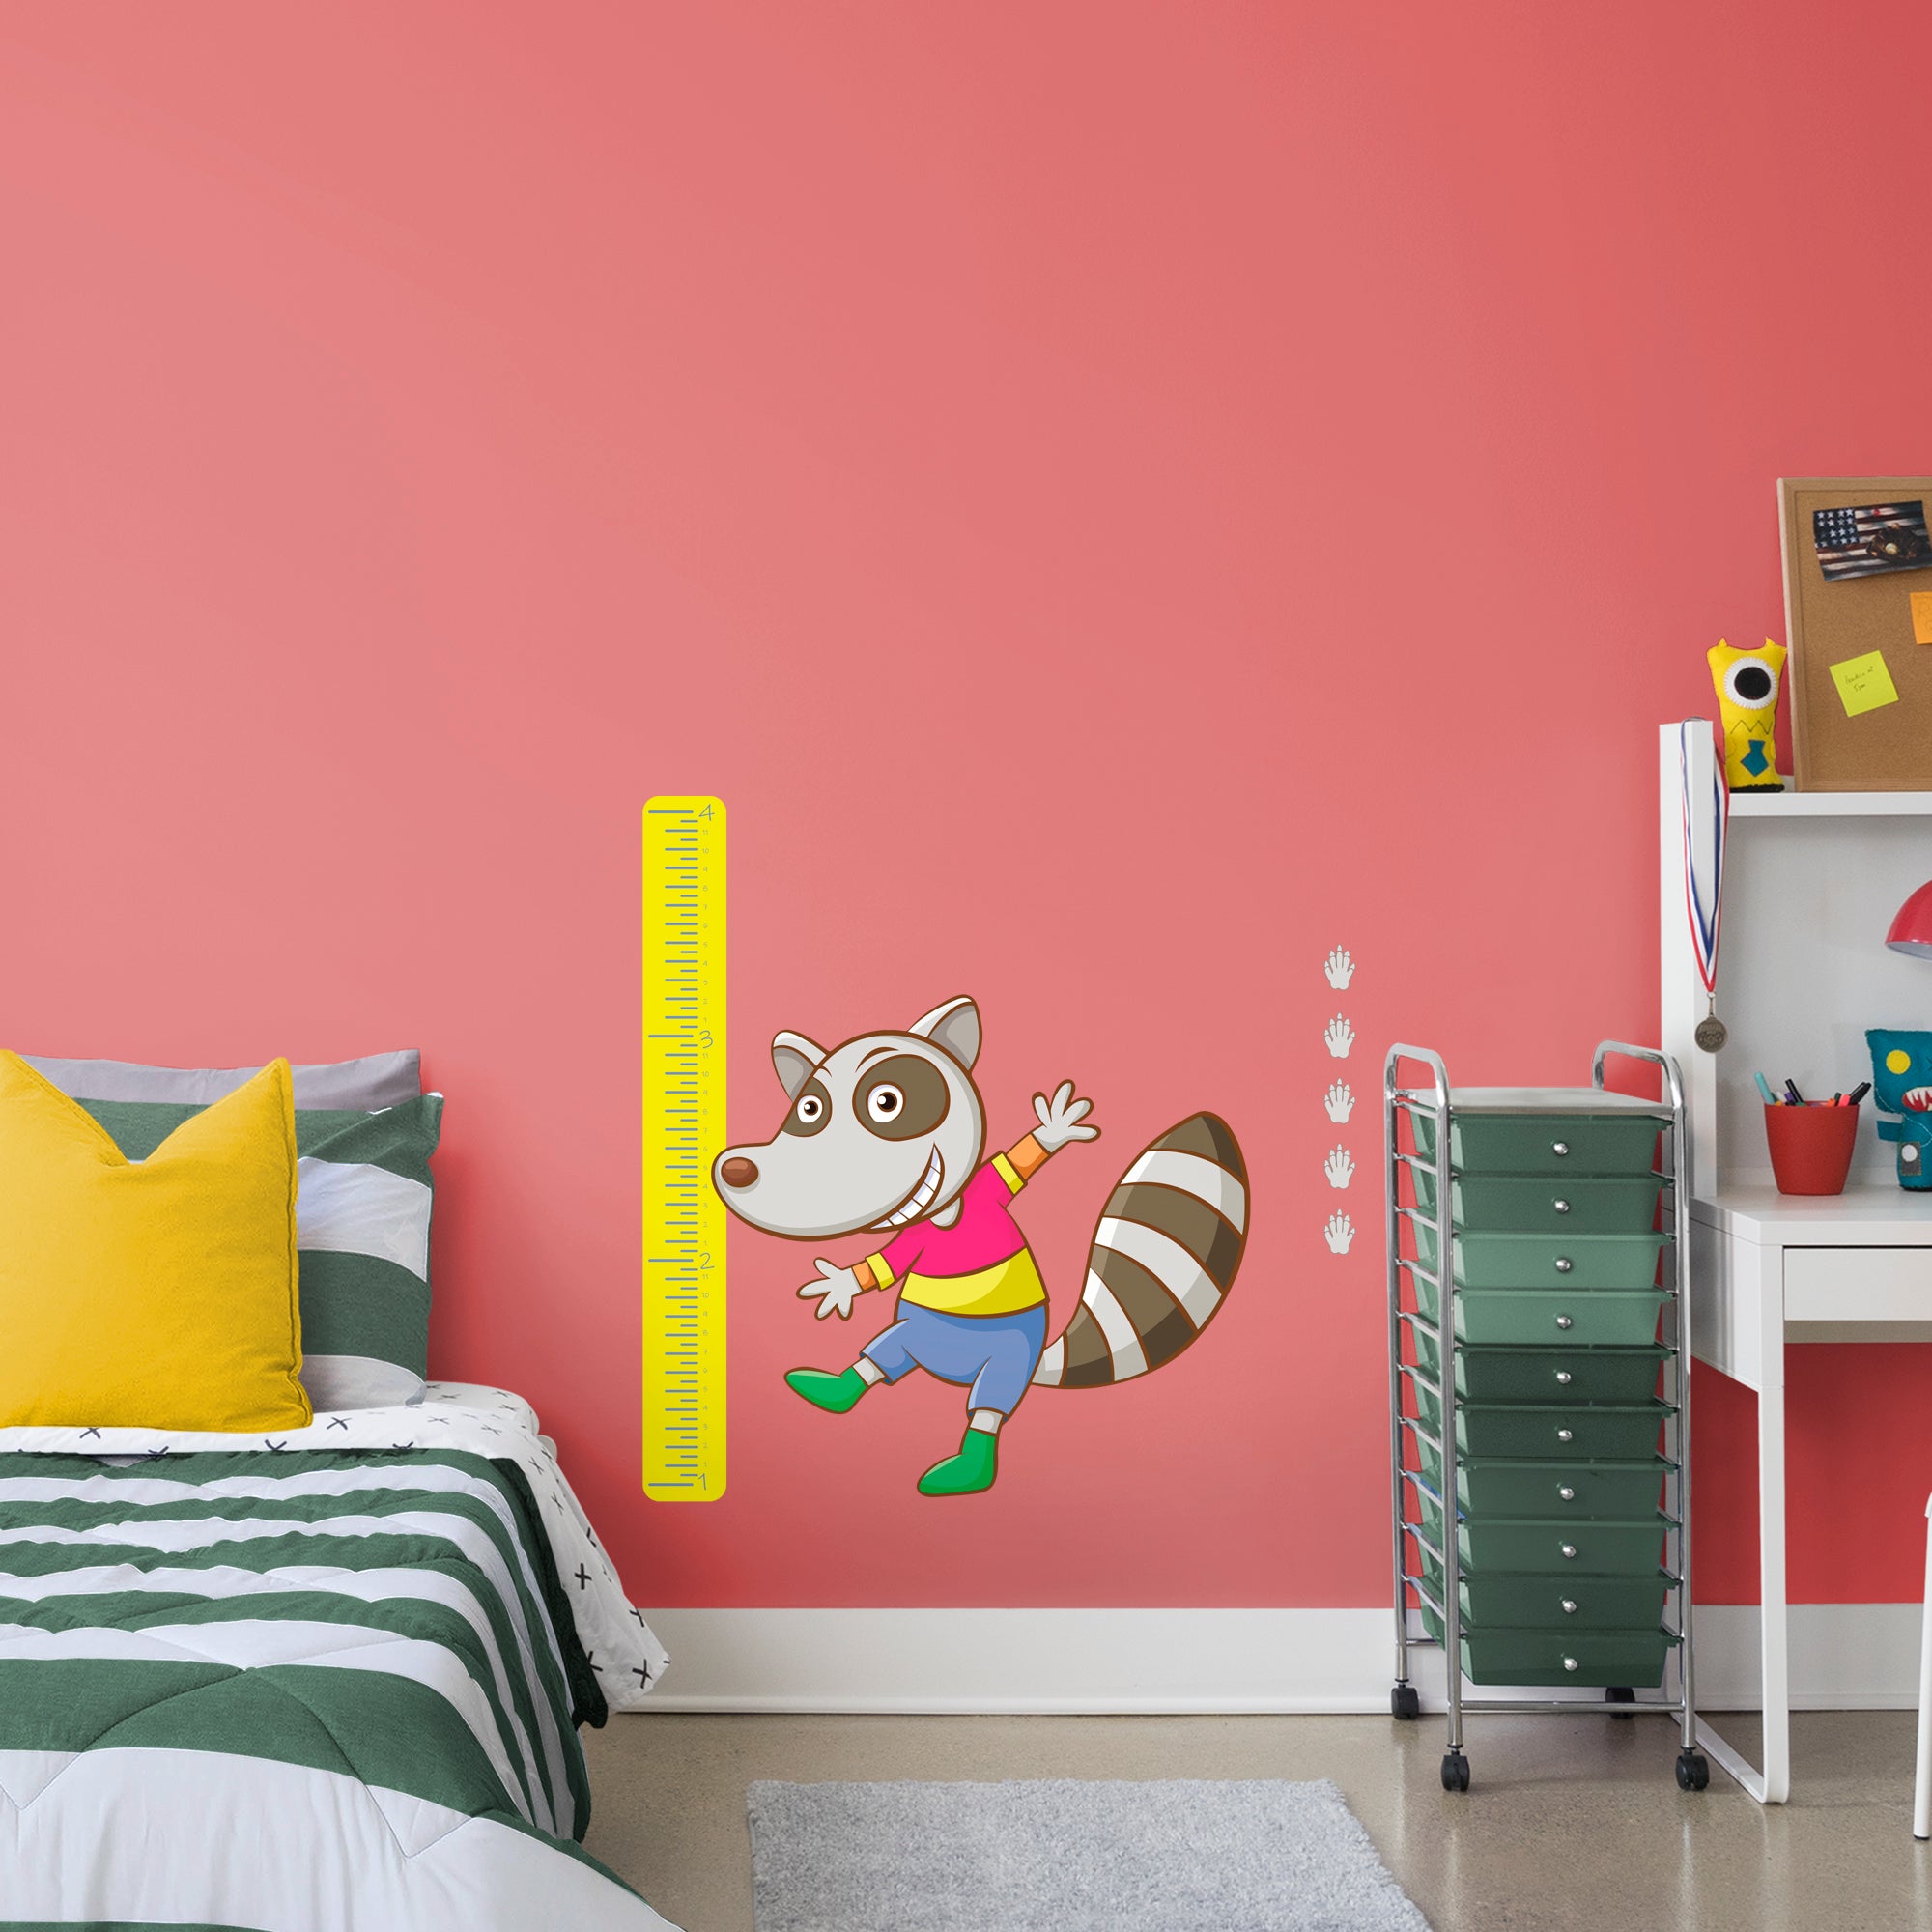 Growth Chart Raccoon - Removable Wall Decal Growth Chart (33"W x 38"H) by Fathead | Vinyl